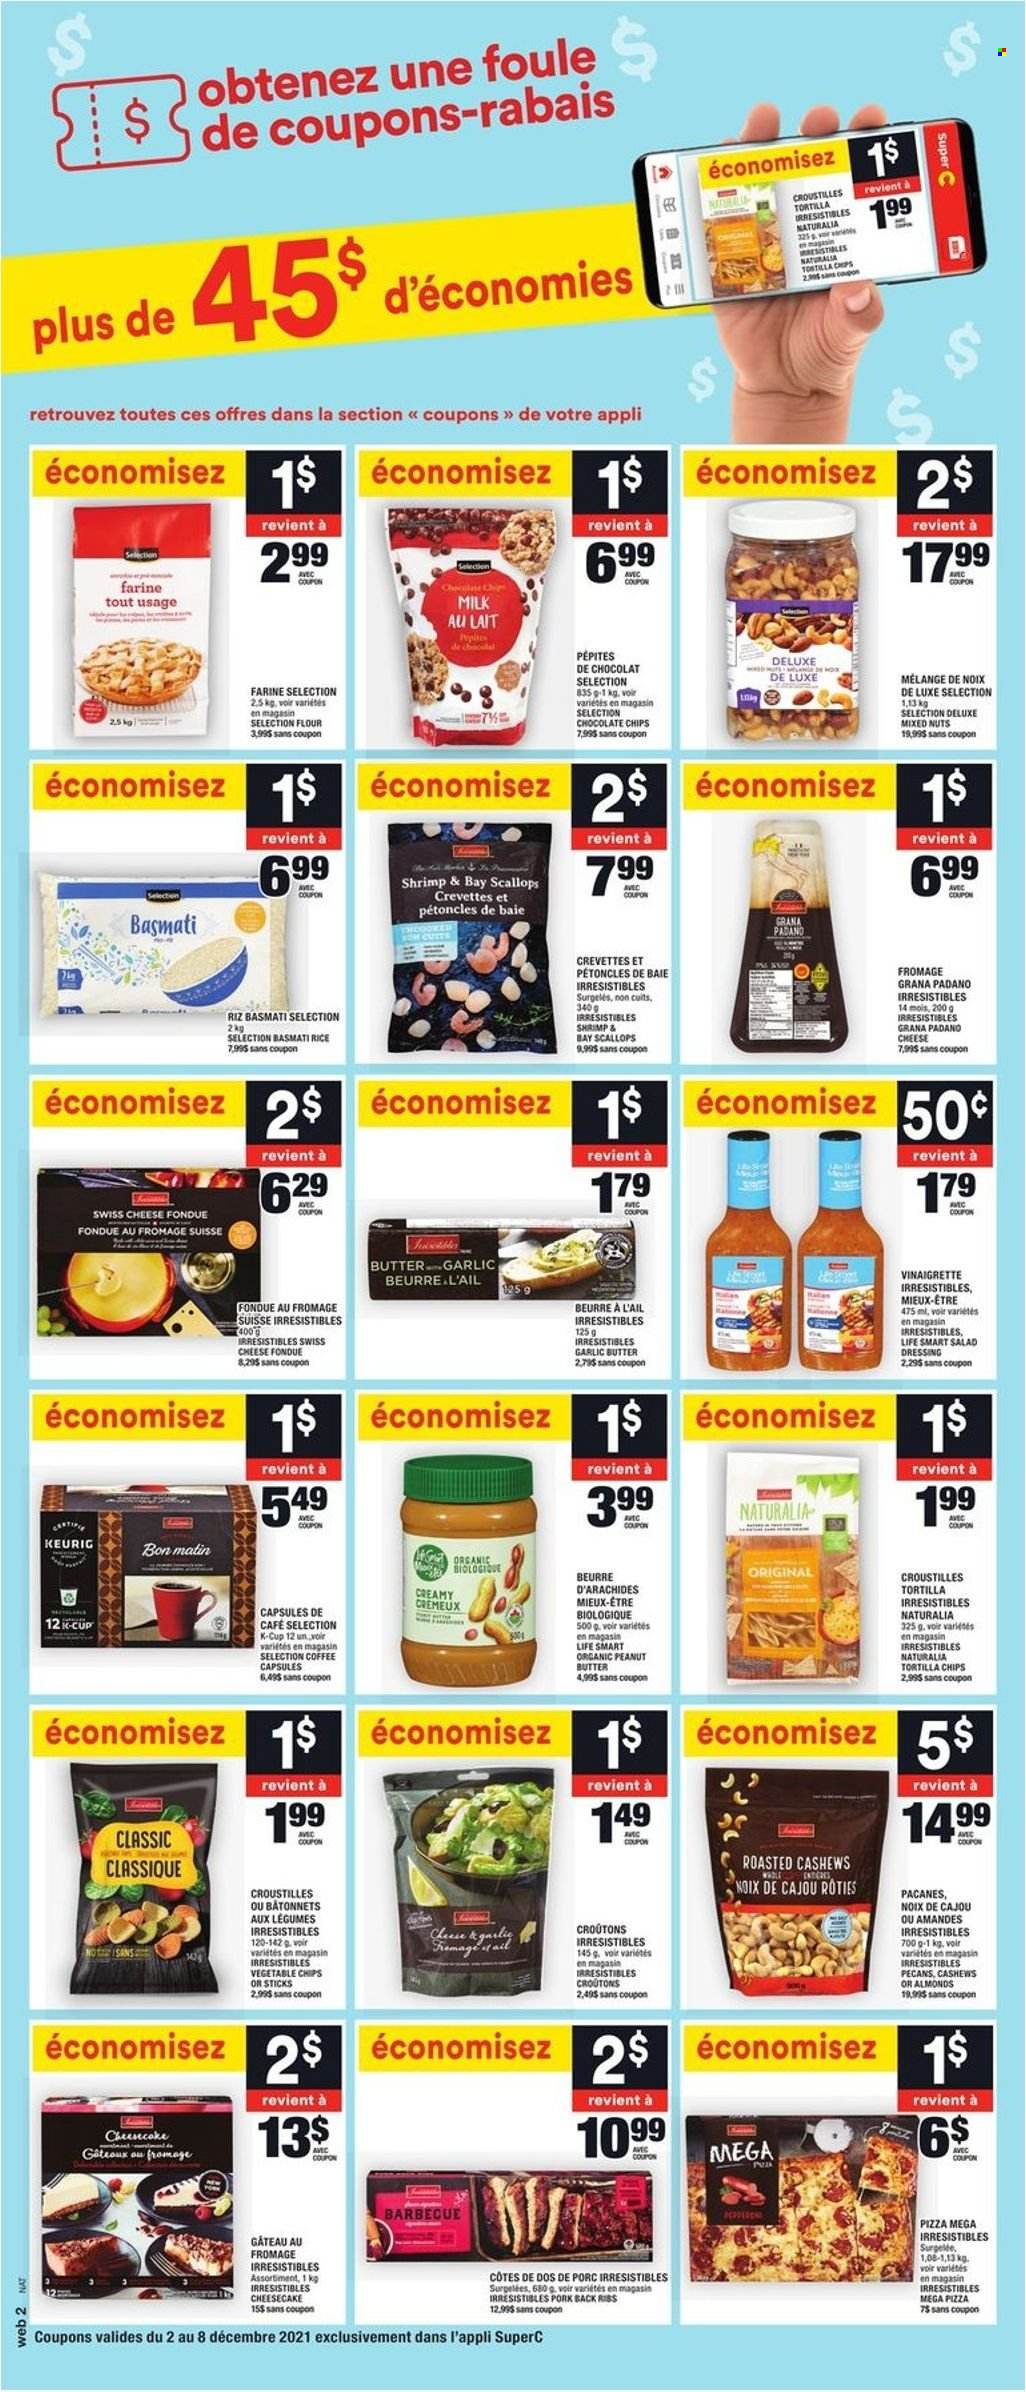 thumbnail - Super C Flyer - December 02, 2021 - December 08, 2021 - Sales products - cheesecake, scallops, shrimps, pizza, swiss cheese, Grana Padano, milk, tortilla chips, vegetable chips, basmati rice, rice, salad dressing, vinaigrette dressing, dressing, peanut butter, almonds, cashews, pecans, mixed nuts, coffee, coffee capsules, K-Cups, Keurig, pork meat, pork ribs, pork back ribs. Page 12.